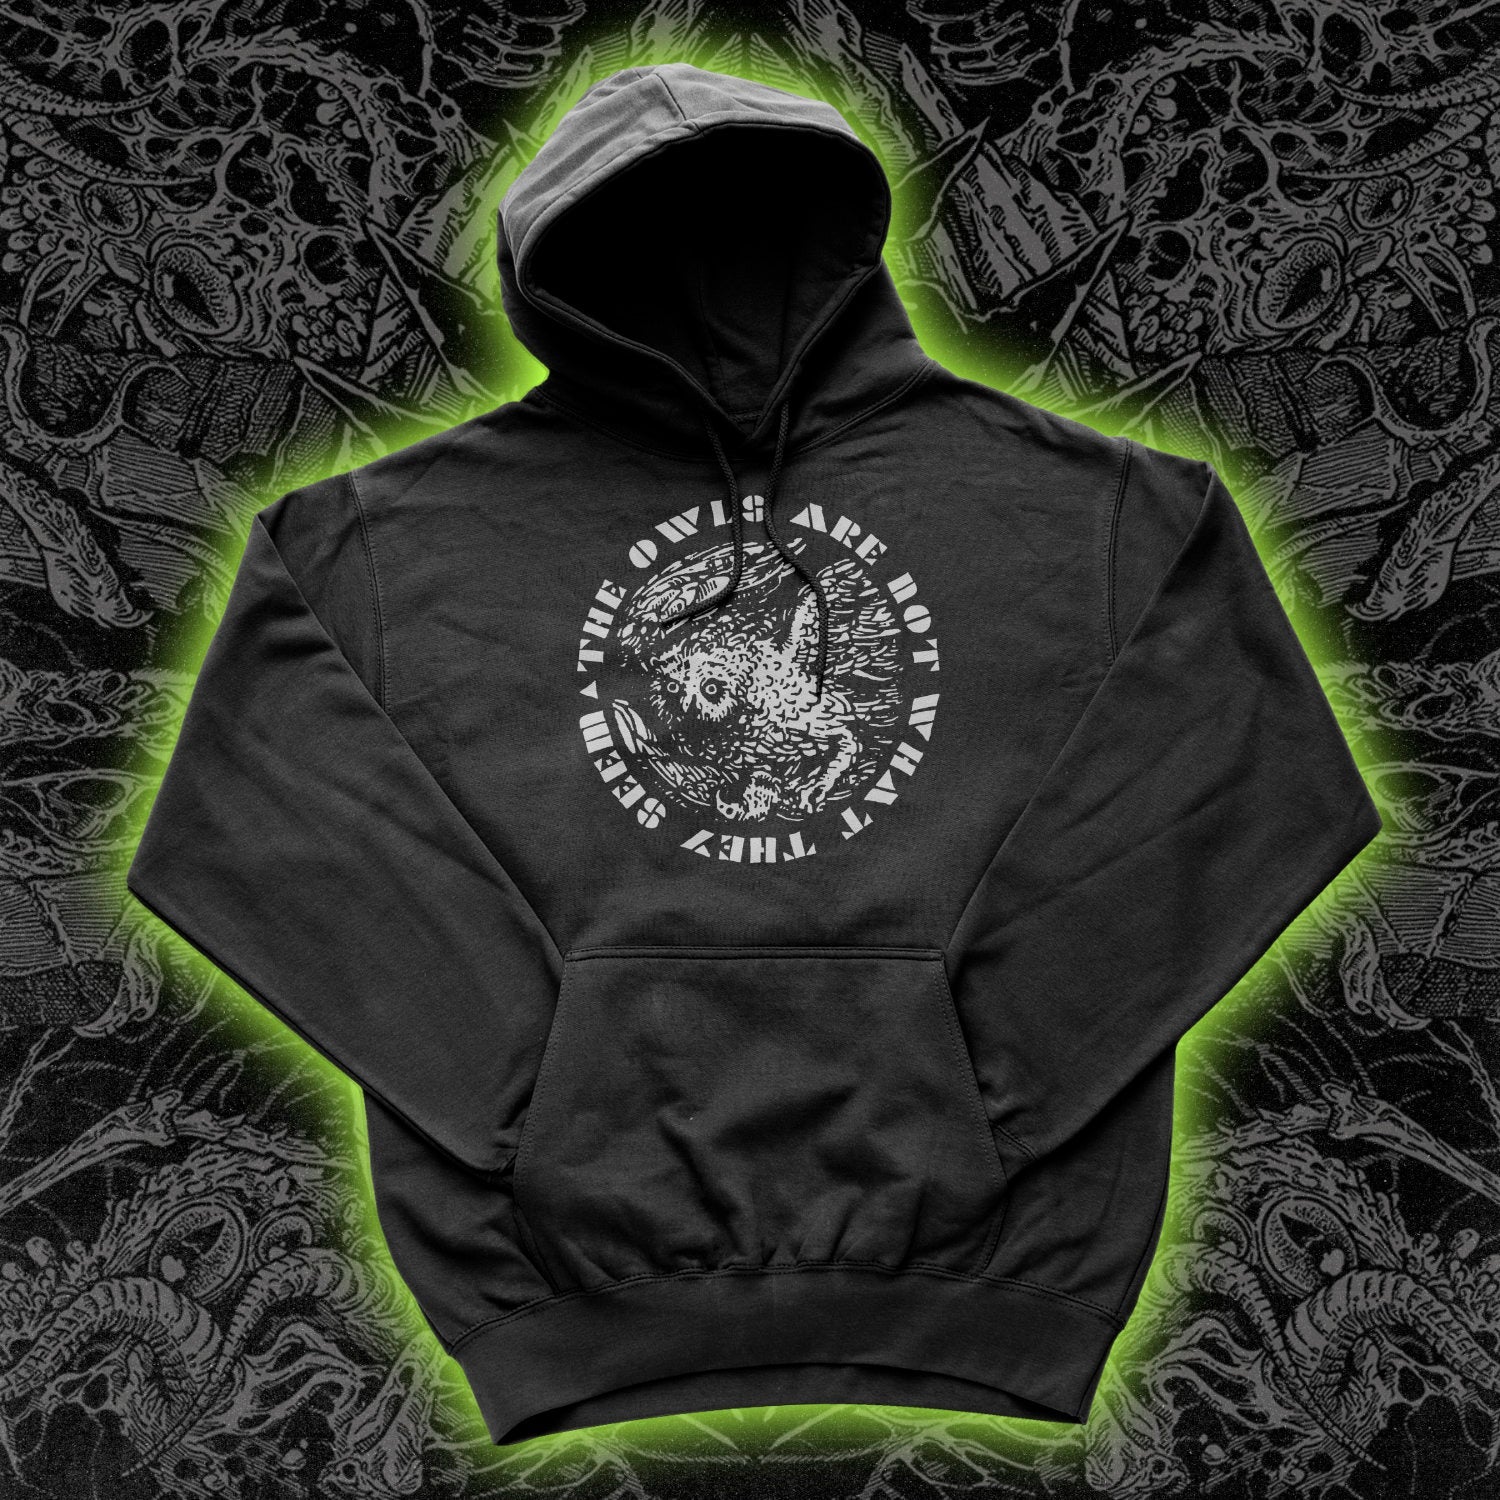 The Owls Are Not What They Seem Hoodie